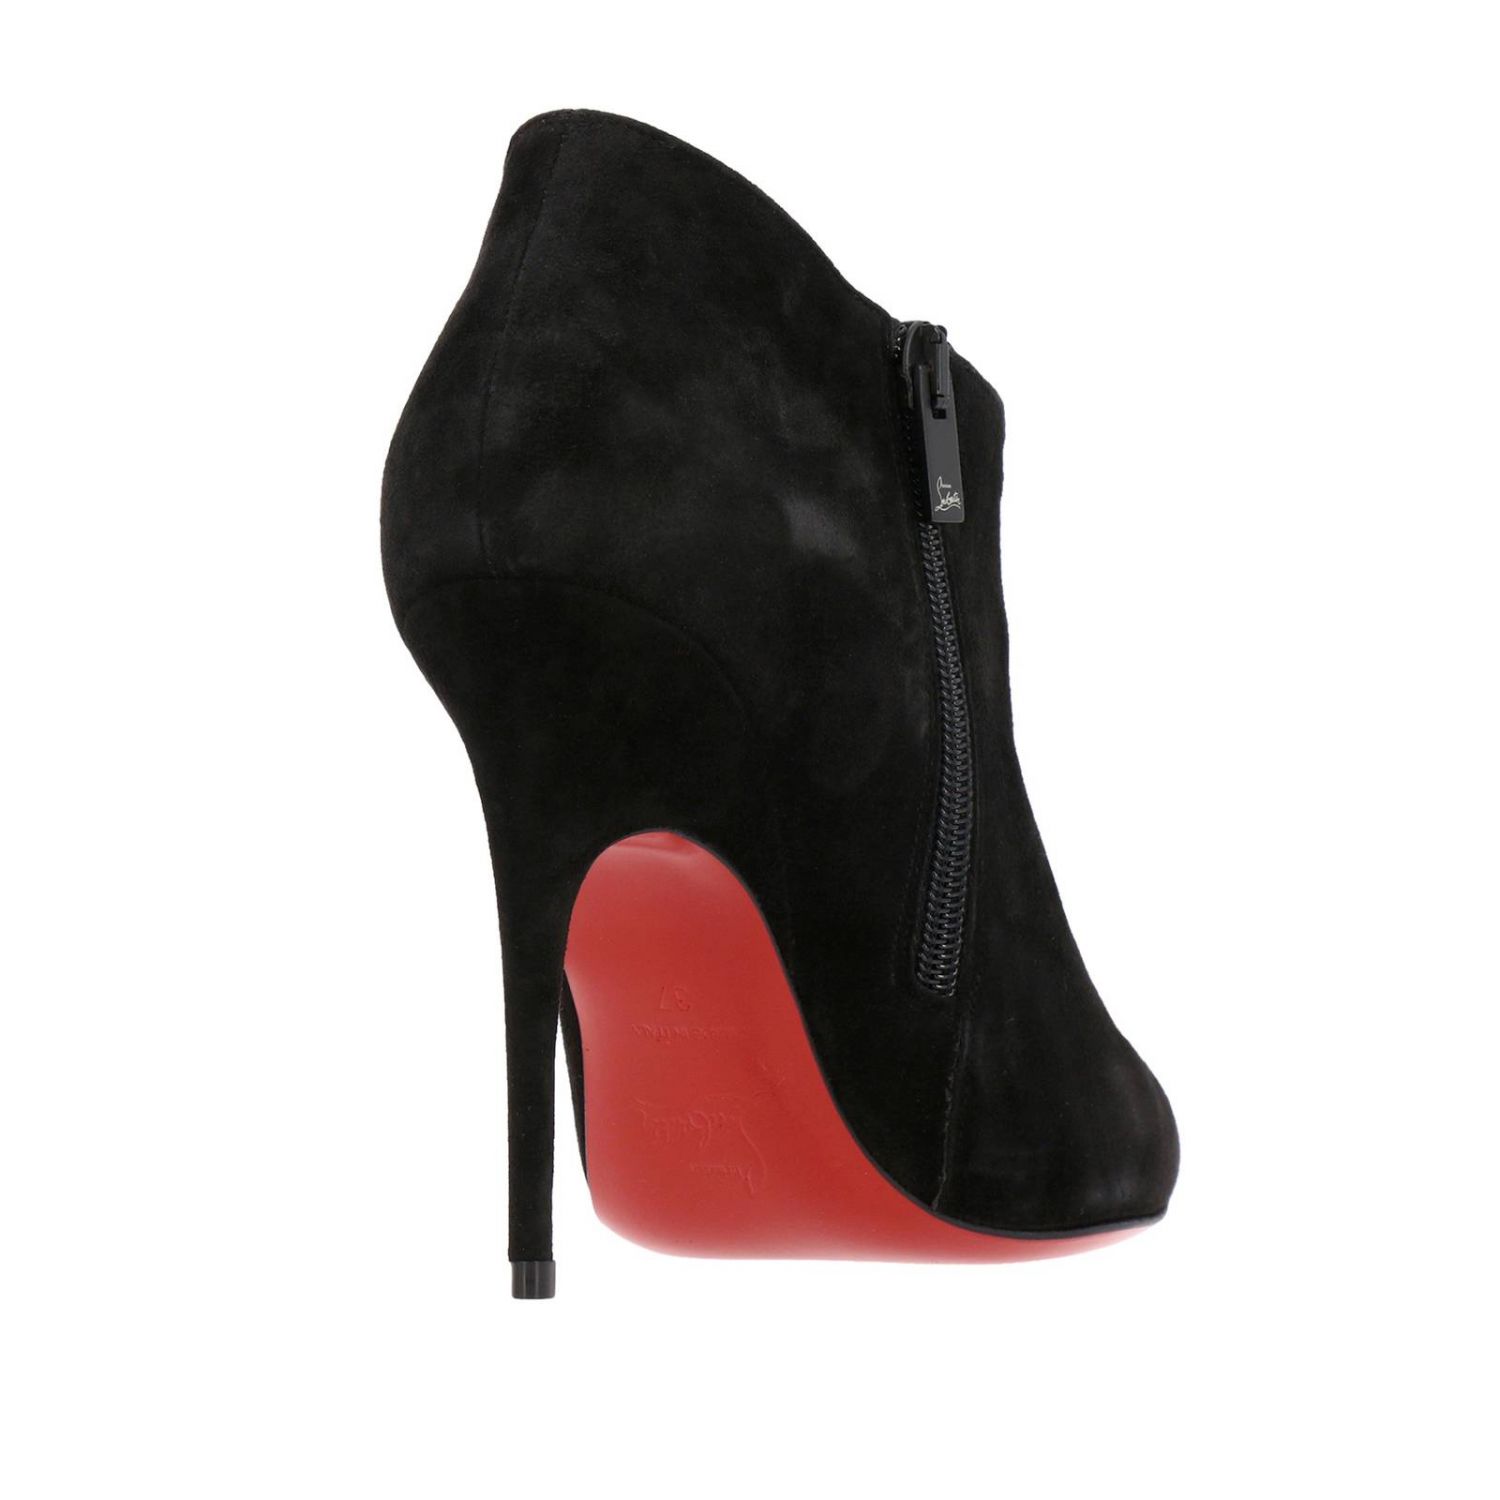 CHRISTIAN LOUBOUTIN: Gorgona ankle boots in suede - Black | Christian ...